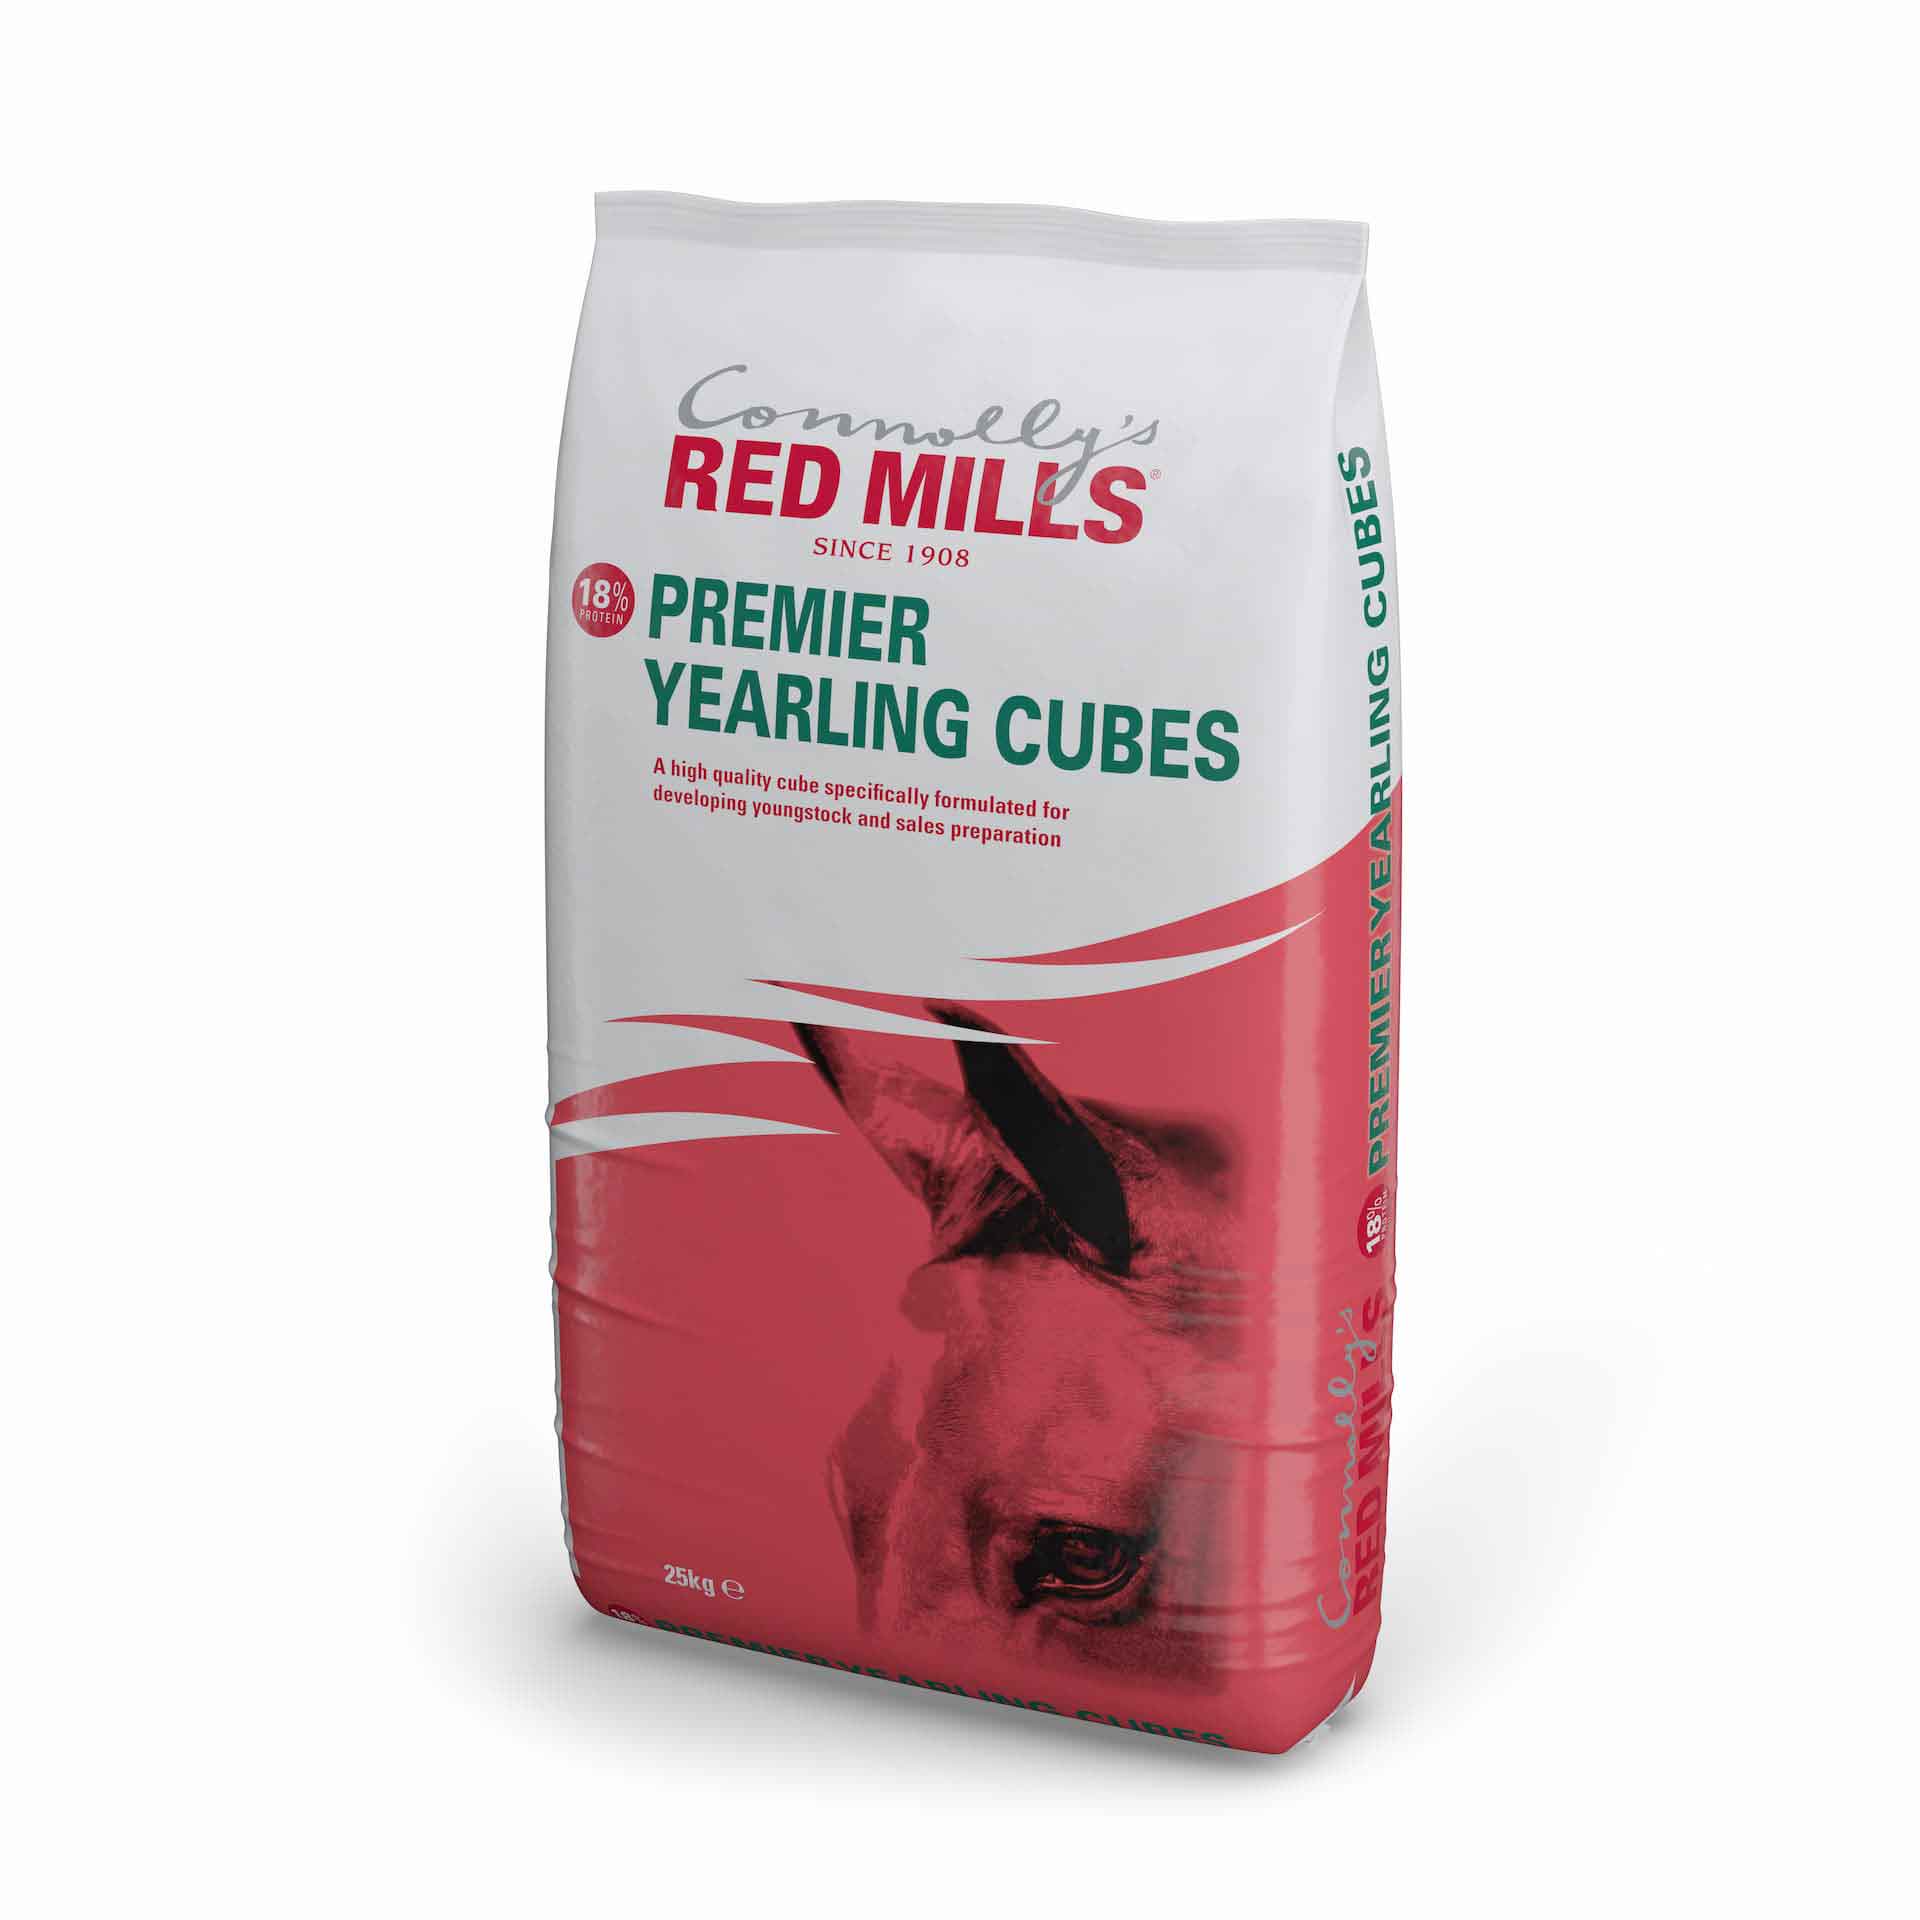 Red Mills Premier Yearling Cubes